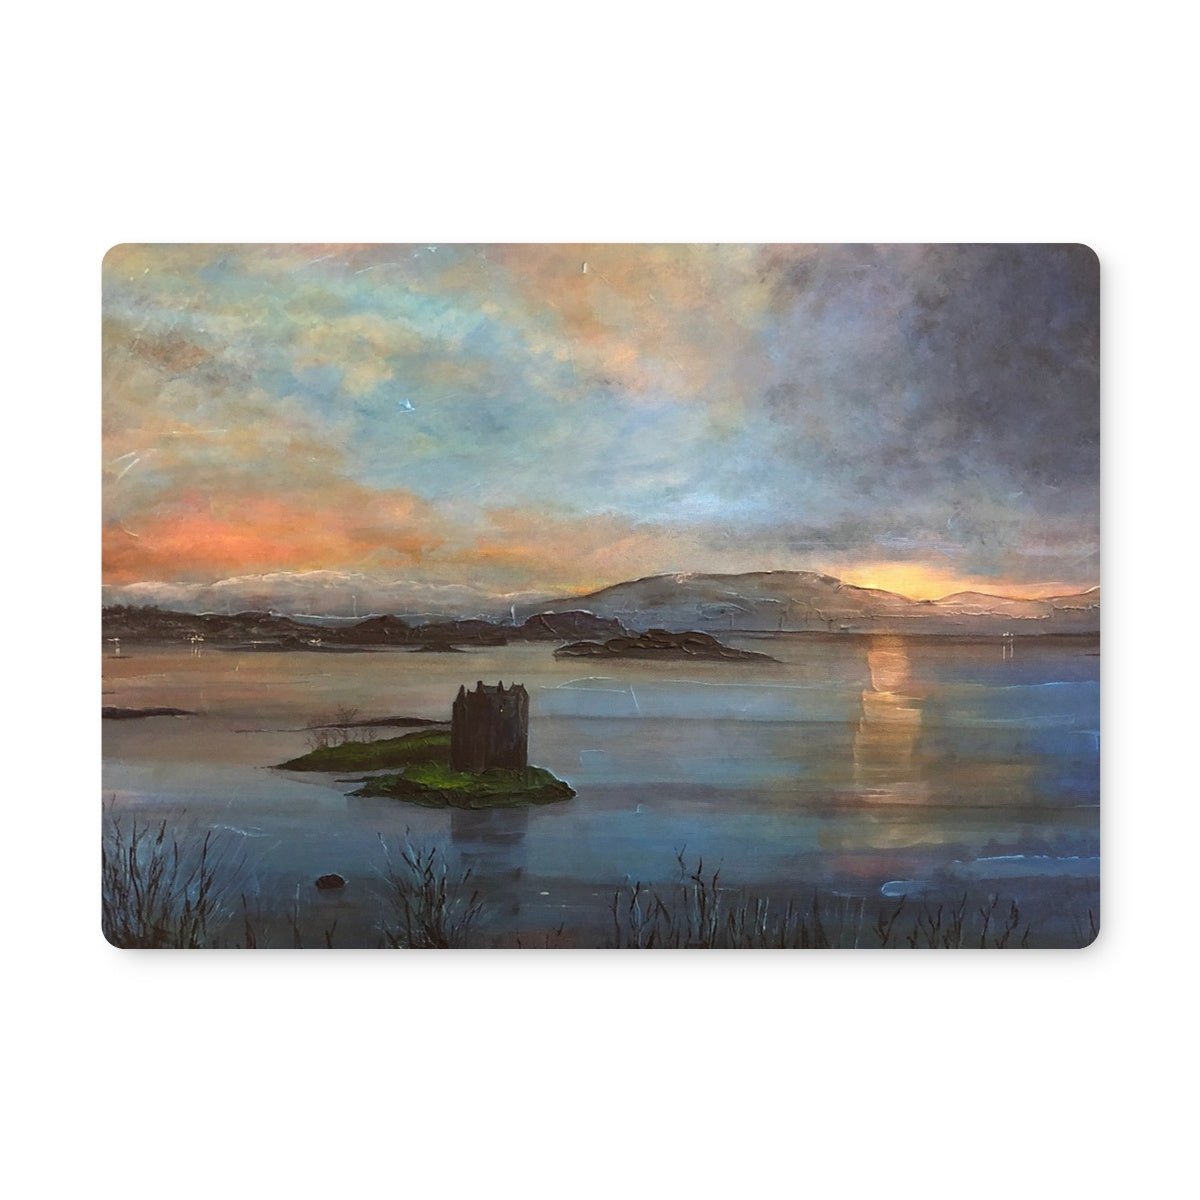 Castle Stalker Twilight Art Gifts Placemat-Placemats-Historic & Iconic Scotland Art Gallery-Single Placemat-Paintings, Prints, Homeware, Art Gifts From Scotland By Scottish Artist Kevin Hunter